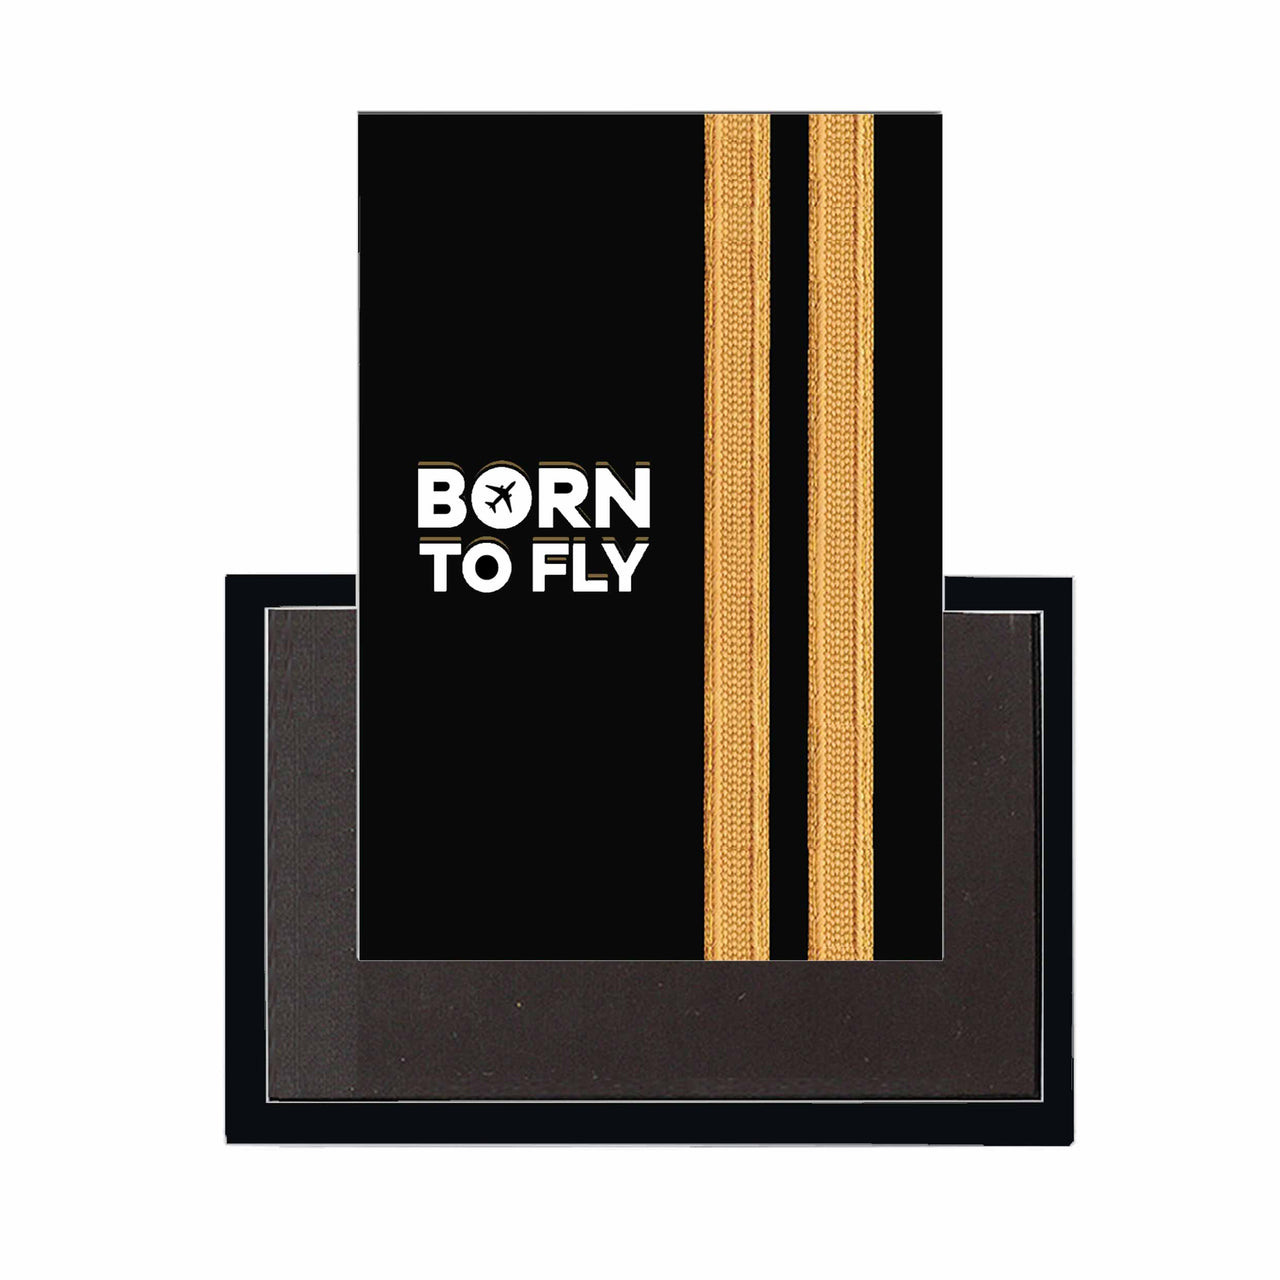 Born To Fly & Pilot Epaulettes (2 Lines) Designed Magnets